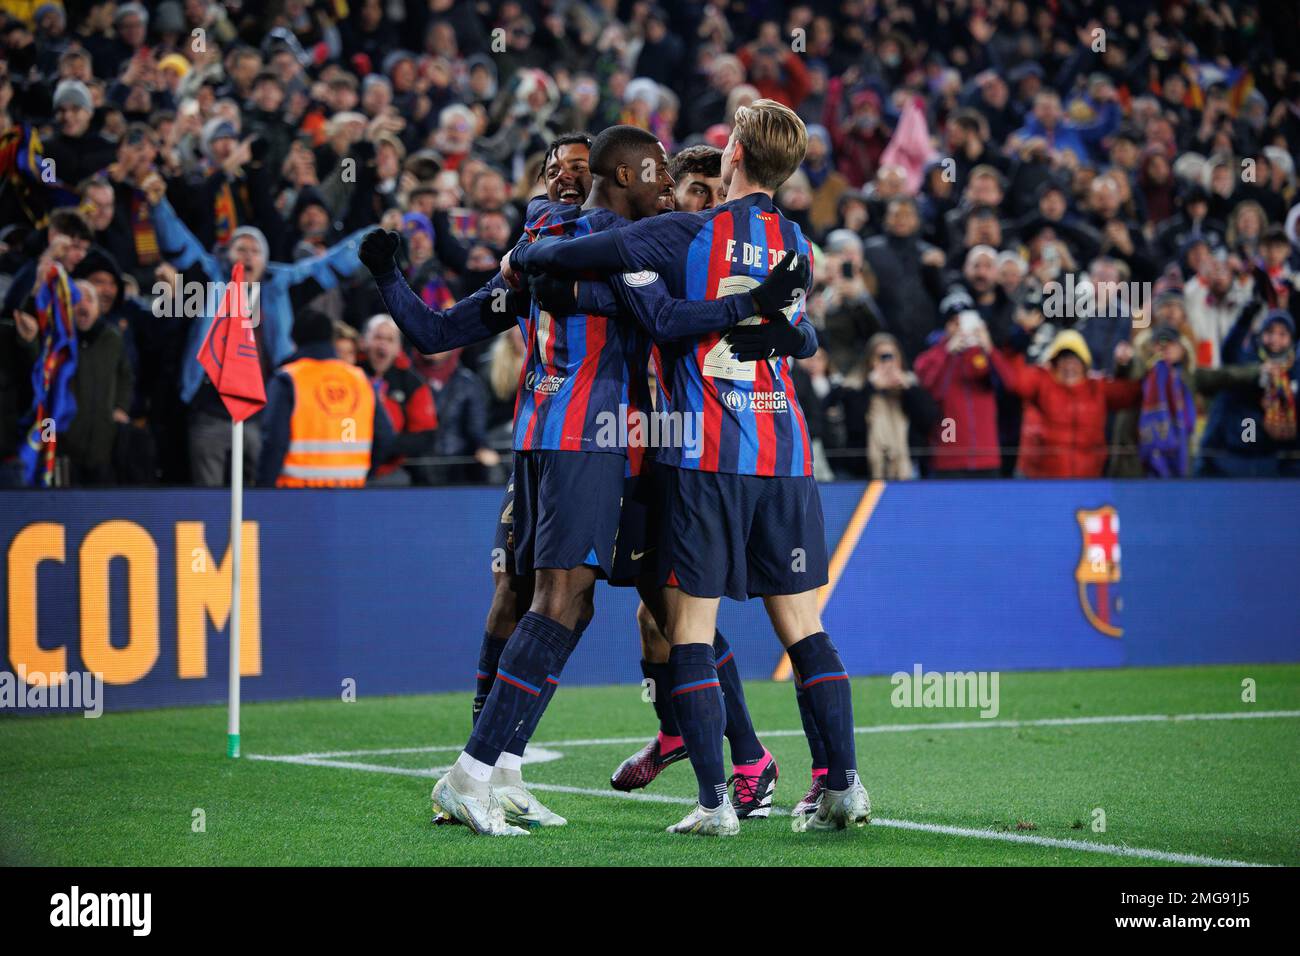 Barcelona, Spain. 25th Jan, 2023. Dembele celebrates after scoring a goal during the Copa Del Rey match between FC Barcelona and Real Sociedad at the Spotify Camp Nou Stadium in Barcelona, Spain. Credit: Christian Bertrand/Alamy Live News Stock Photo